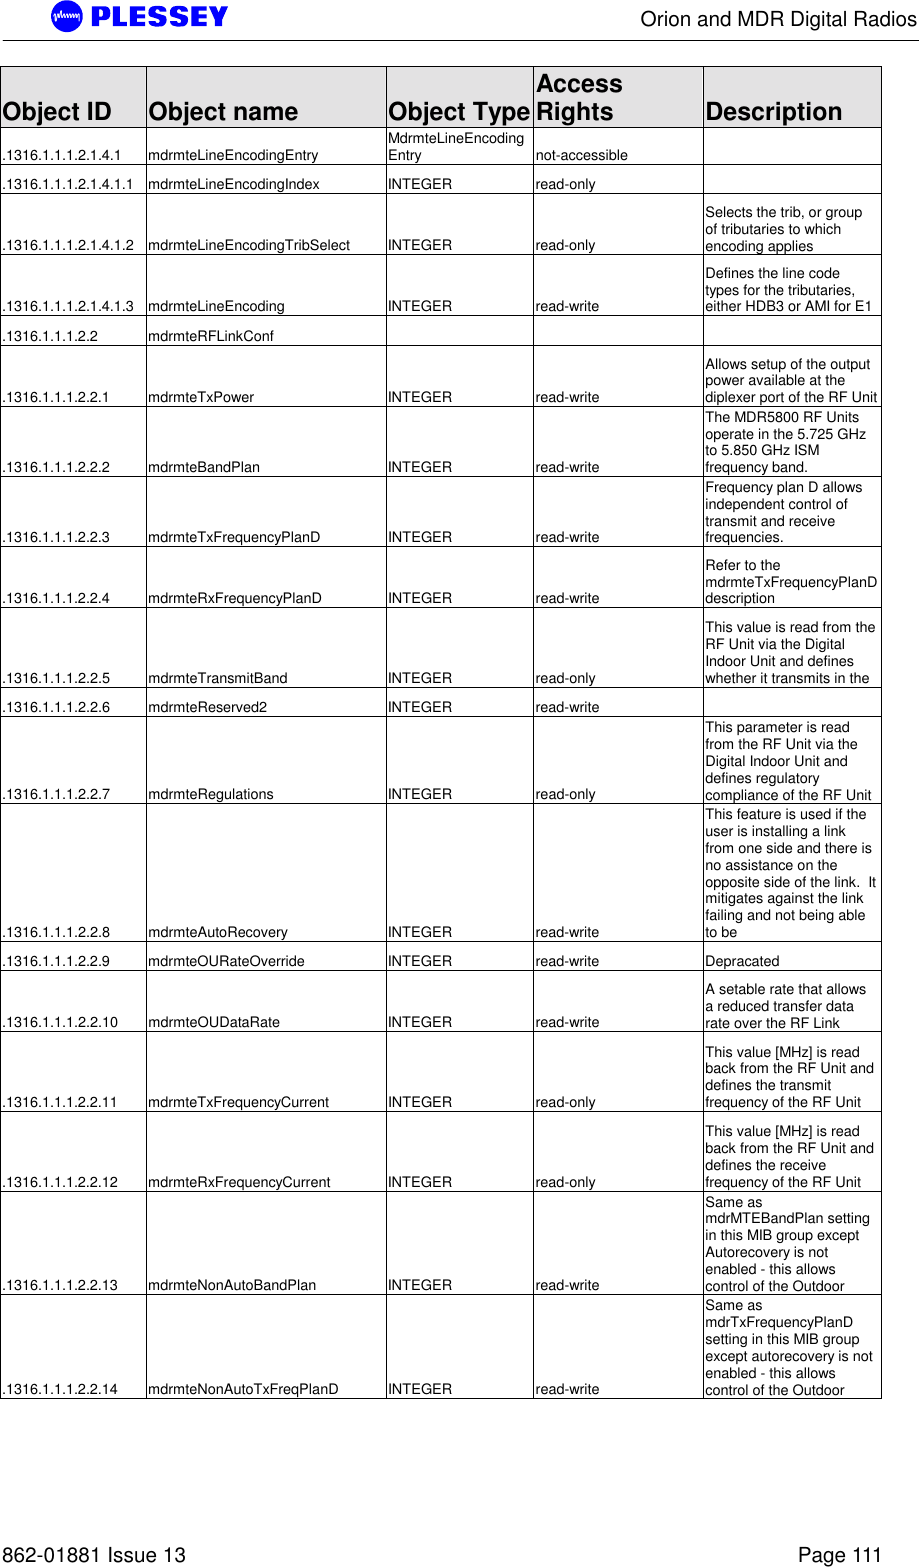      Orion and MDR Digital Radios   862-01881 Issue 13    Page 111 Object ID  Object name  Object Type Access Rights  Description .1316.1.1.1.2.1.4.1 mdrmteLineEncodingEntry  MdrmteLineEncodingEntry not-accessible  .1316.1.1.1.2.1.4.1.1 mdrmteLineEncodingIndex  INTEGER  read-only   .1316.1.1.1.2.1.4.1.2 mdrmteLineEncodingTribSelect  INTEGER  read-only Selects the trib, or group of tributaries to which encoding applies .1316.1.1.1.2.1.4.1.3 mdrmteLineEncoding  INTEGER  read-write Defines the line code types for the tributaries, either HDB3 or AMI for E1  .1316.1.1.1.2.2 mdrmteRFLinkConf       .1316.1.1.1.2.2.1 mdrmteTxPower  INTEGER  read-write Allows setup of the output power available at the diplexer port of the RF Unit .1316.1.1.1.2.2.2 mdrmteBandPlan  INTEGER  read-write The MDR5800 RF Units operate in the 5.725 GHz to 5.850 GHz ISM frequency band.   .1316.1.1.1.2.2.3 mdrmteTxFrequencyPlanD  INTEGER  read-write Frequency plan D allows independent control of transmit and receive frequencies.   .1316.1.1.1.2.2.4 mdrmteRxFrequencyPlanD  INTEGER  read-write Refer to the mdrmteTxFrequencyPlanD description .1316.1.1.1.2.2.5 mdrmteTransmitBand  INTEGER  read-only This value is read from the RF Unit via the Digital Indoor Unit and defines whether it transmits in the  .1316.1.1.1.2.2.6 mdrmteReserved2  INTEGER  read-write   .1316.1.1.1.2.2.7 mdrmteRegulations  INTEGER  read-only This parameter is read from the RF Unit via the Digital Indoor Unit and defines regulatory compliance of the RF Unit .1316.1.1.1.2.2.8 mdrmteAutoRecovery  INTEGER  read-write This feature is used if the user is installing a link from one side and there is no assistance on the opposite side of the link.  It mitigates against the link failing and not being able to be  .1316.1.1.1.2.2.9 mdrmteOURateOverride  INTEGER  read-write  Depracated .1316.1.1.1.2.2.10 mdrmteOUDataRate  INTEGER  read-write A setable rate that allows a reduced transfer data rate over the RF Link .1316.1.1.1.2.2.11 mdrmteTxFrequencyCurrent  INTEGER  read-only This value [MHz] is read back from the RF Unit and defines the transmit frequency of the RF Unit .1316.1.1.1.2.2.12 mdrmteRxFrequencyCurrent  INTEGER  read-only This value [MHz] is read back from the RF Unit and defines the receive frequency of the RF Unit .1316.1.1.1.2.2.13 mdrmteNonAutoBandPlan  INTEGER  read-write Same as mdrMTEBandPlan setting in this MIB group except Autorecovery is not enabled - this allows control of the Outdoor  .1316.1.1.1.2.2.14 mdrmteNonAutoTxFreqPlanD  INTEGER  read-write Same as mdrTxFrequencyPlanD setting in this MIB group except autorecovery is not enabled - this allows control of the Outdoor  